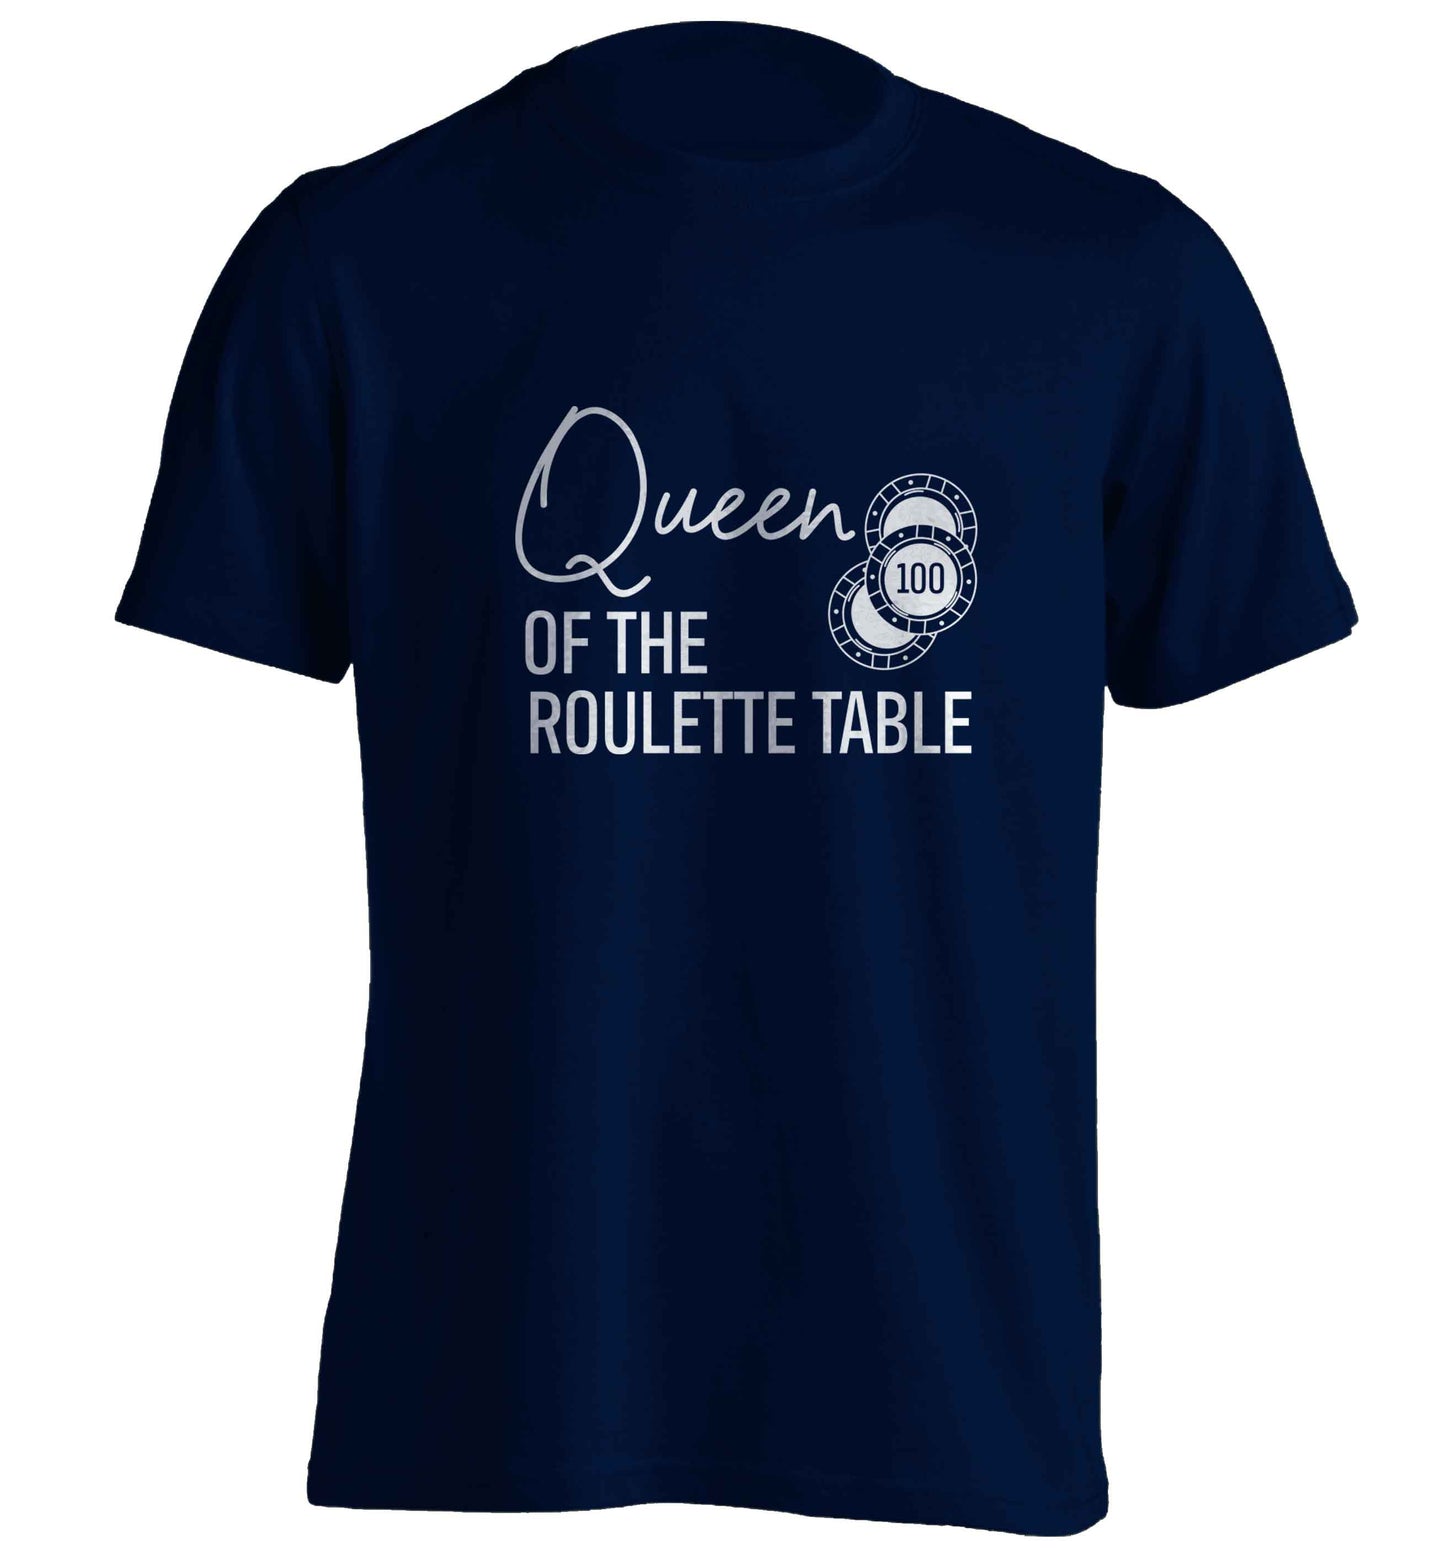 Queen of the roulette table adults unisex navy Tshirt 2XL